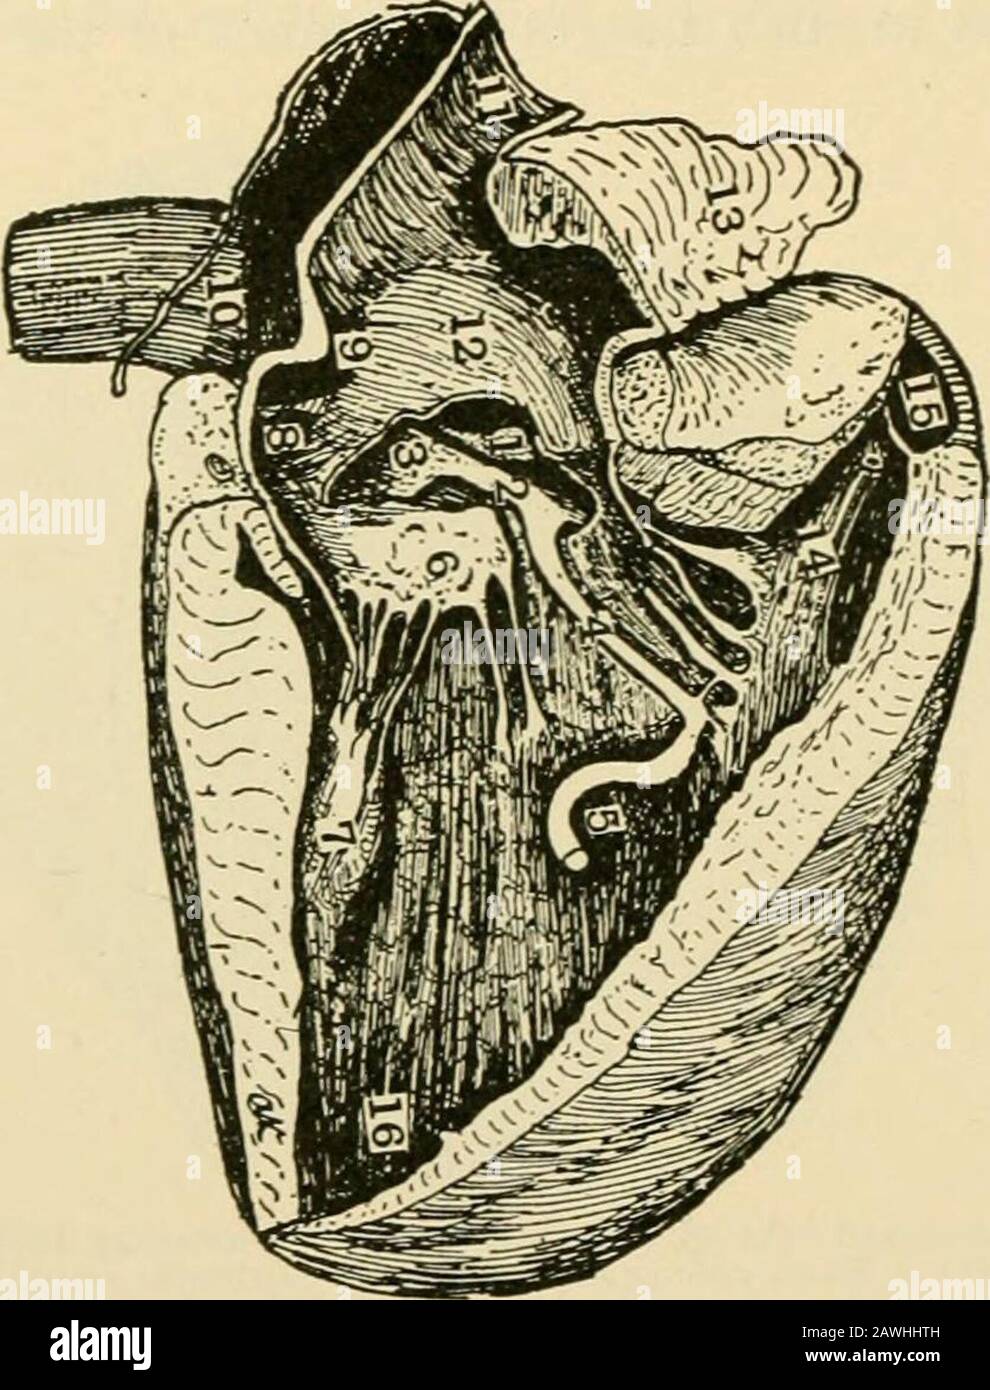 A text-book of physiology for medical students and physicians . muscle, with, perhaps, a pause at a sino-auricularjunction, although this is uncertain. At the other end the bulbuscordis remains in the human heart as the conus arteriosus of theright ventricle, and, as we shall see, there is some evidence thatthis portion of the ventricle contracts somewhat independently.34 530 CIRCULATION OF BLOOD AND LYMPH. The matter of greatest interest in connection with the differentchambers has been the nature of the auriculoventricular junction.In the mammalian heart tendinous tissue develops in this reg Stock Photo